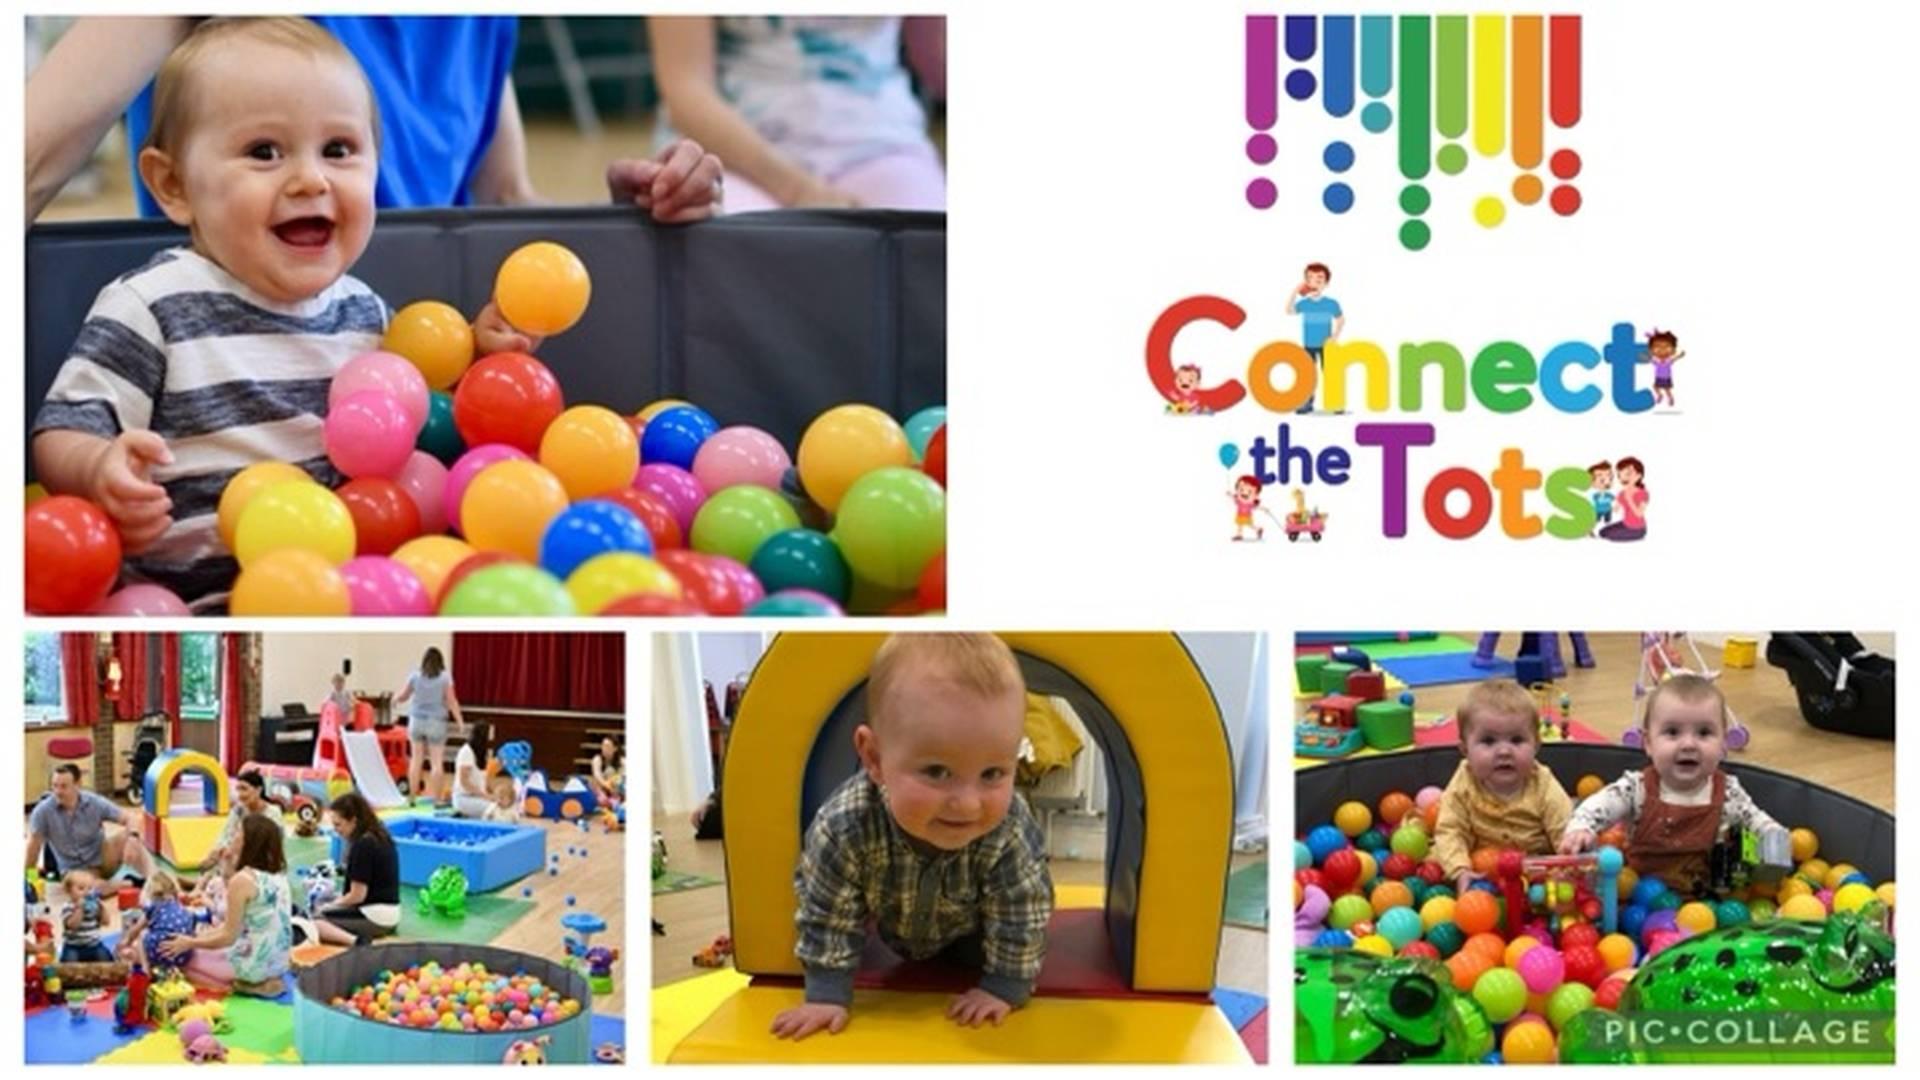 Connect the Tots - play session photo